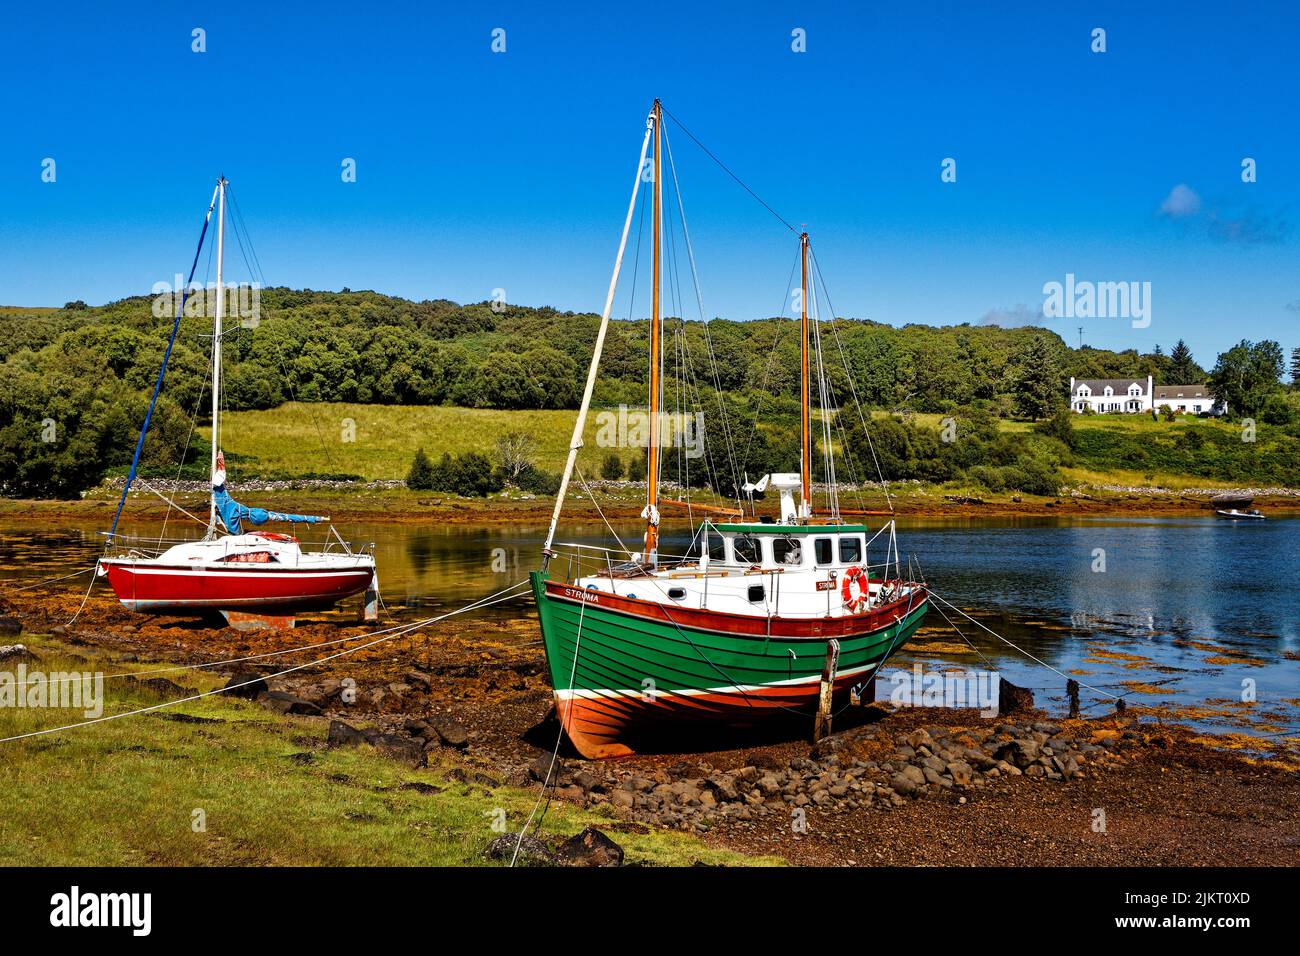 BADACHRO ROSS AND CROMARTY SCOTLAND THE BAY WITH MOORED BOATS AND BRIGHT ORANGE SEAWEED IN SUMMER Stock Photo